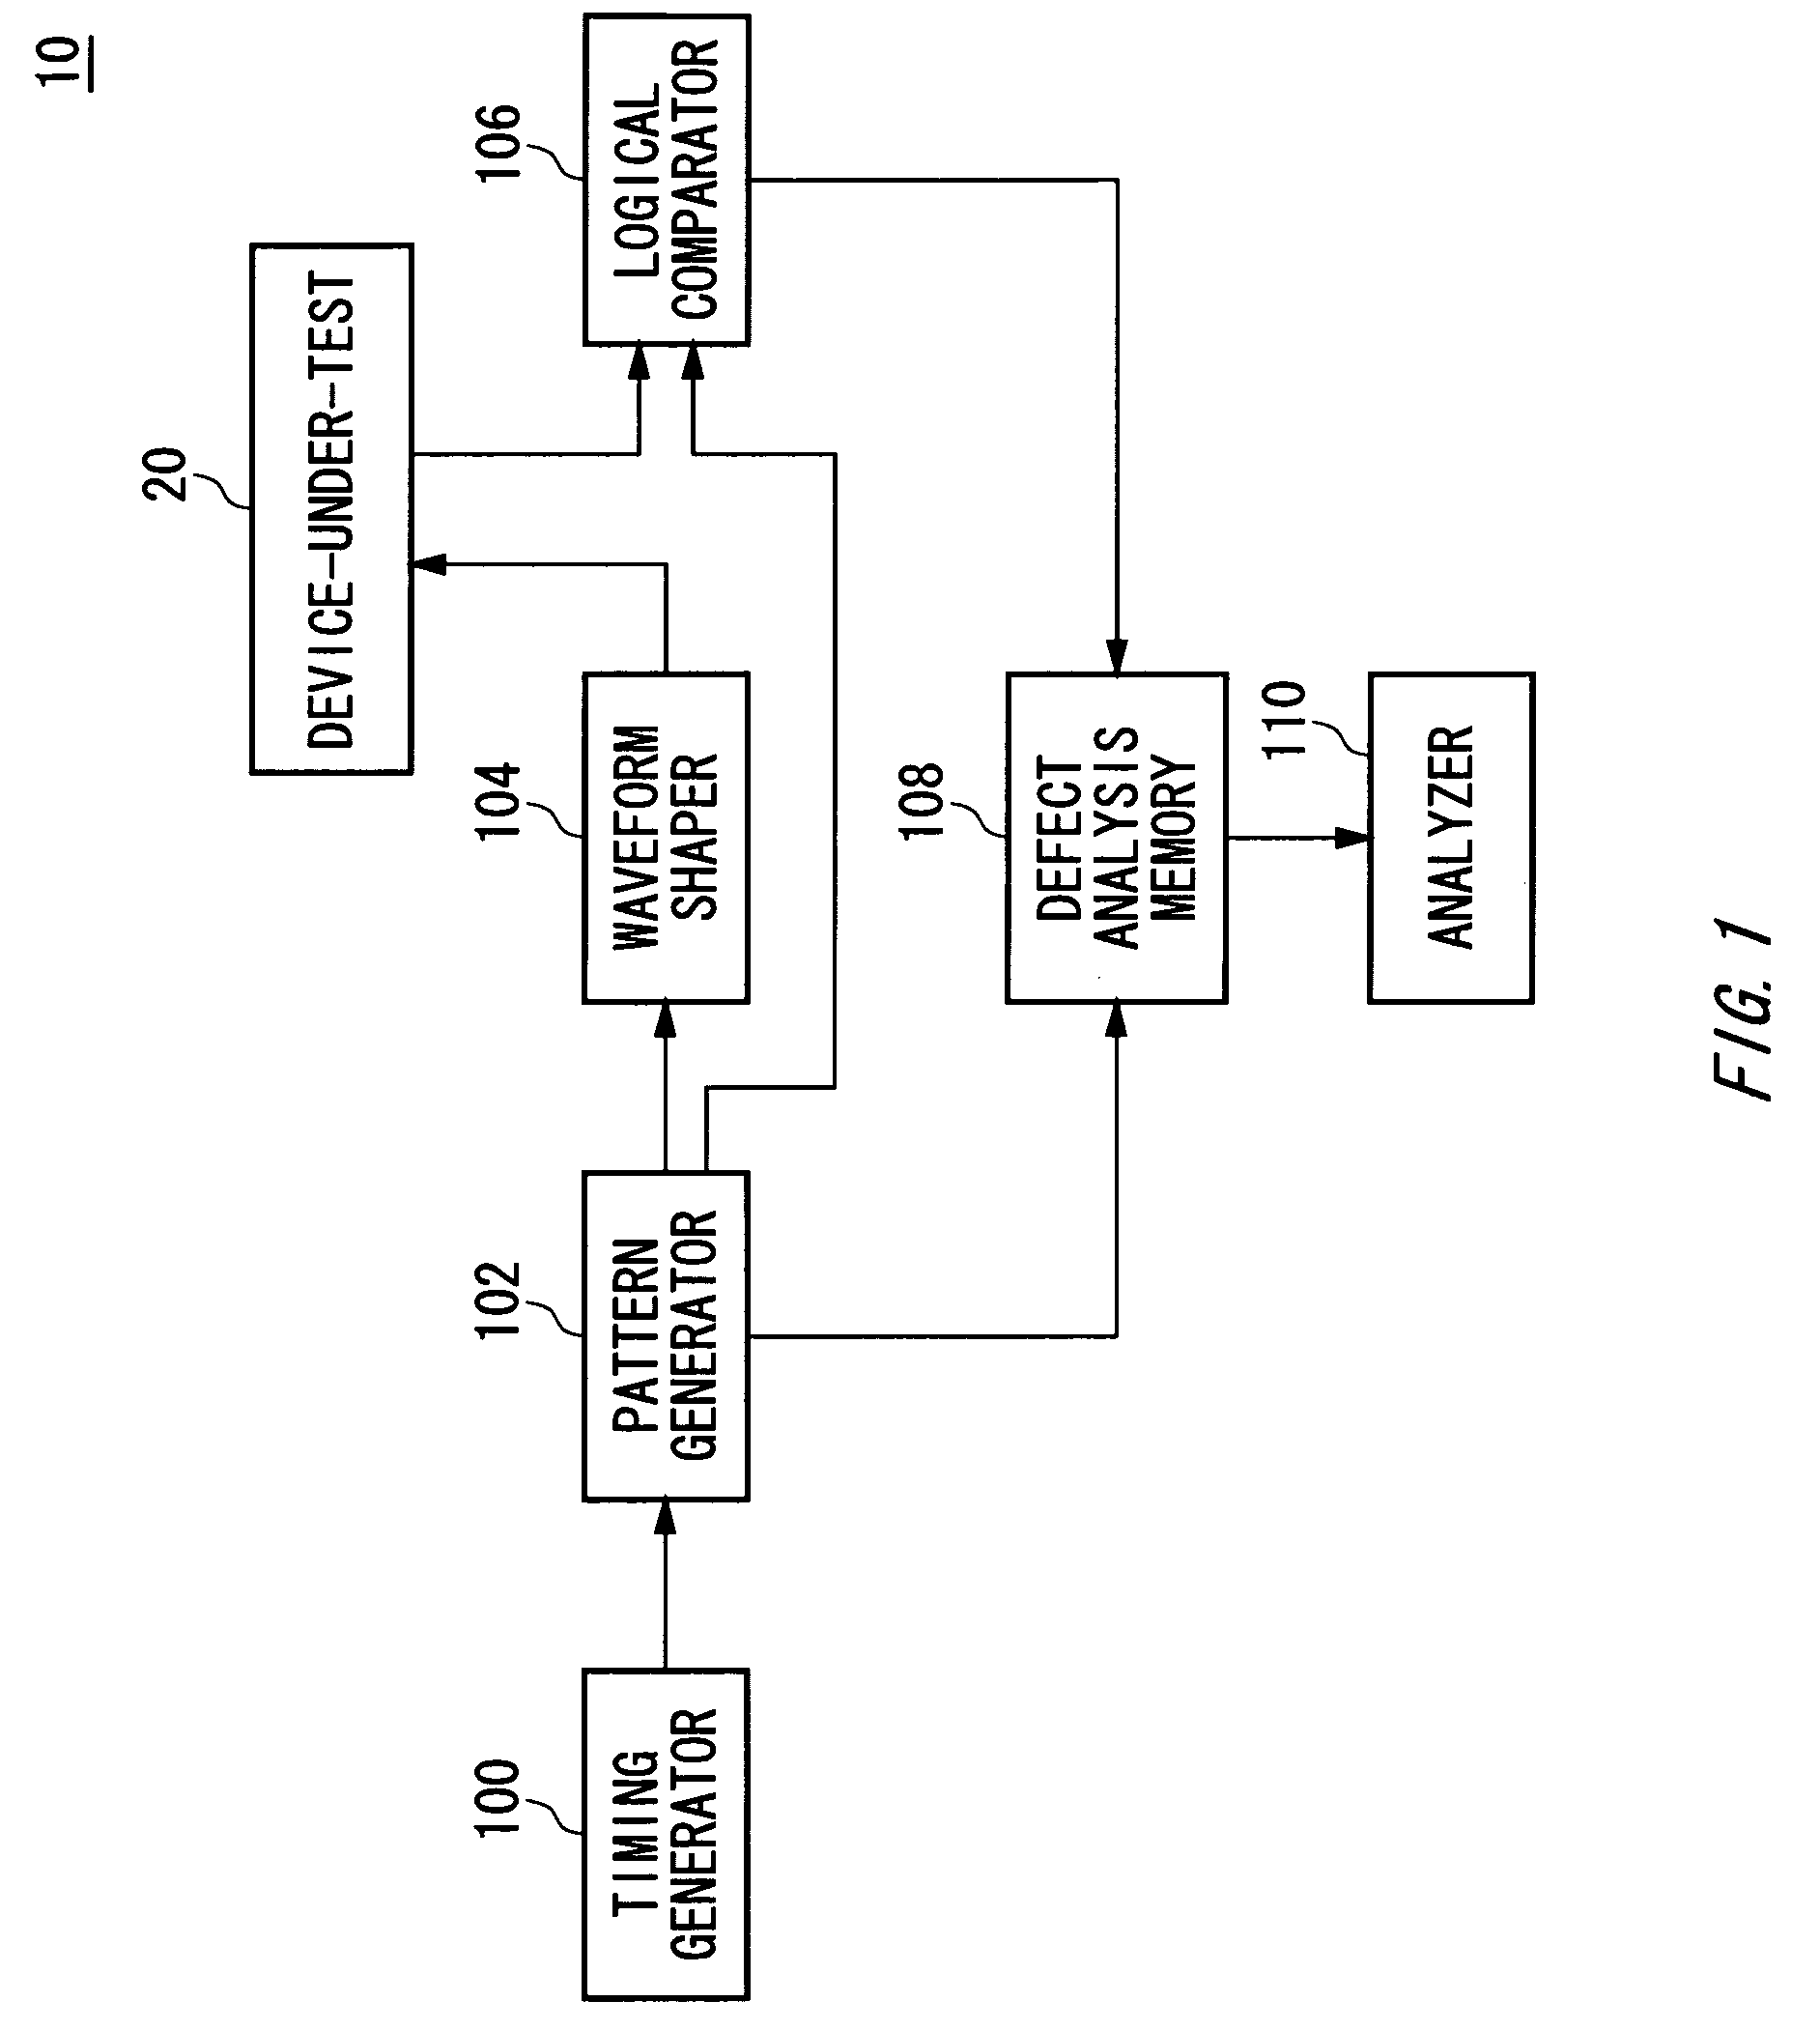 Memory tester having defect analysis memory with two storage sections